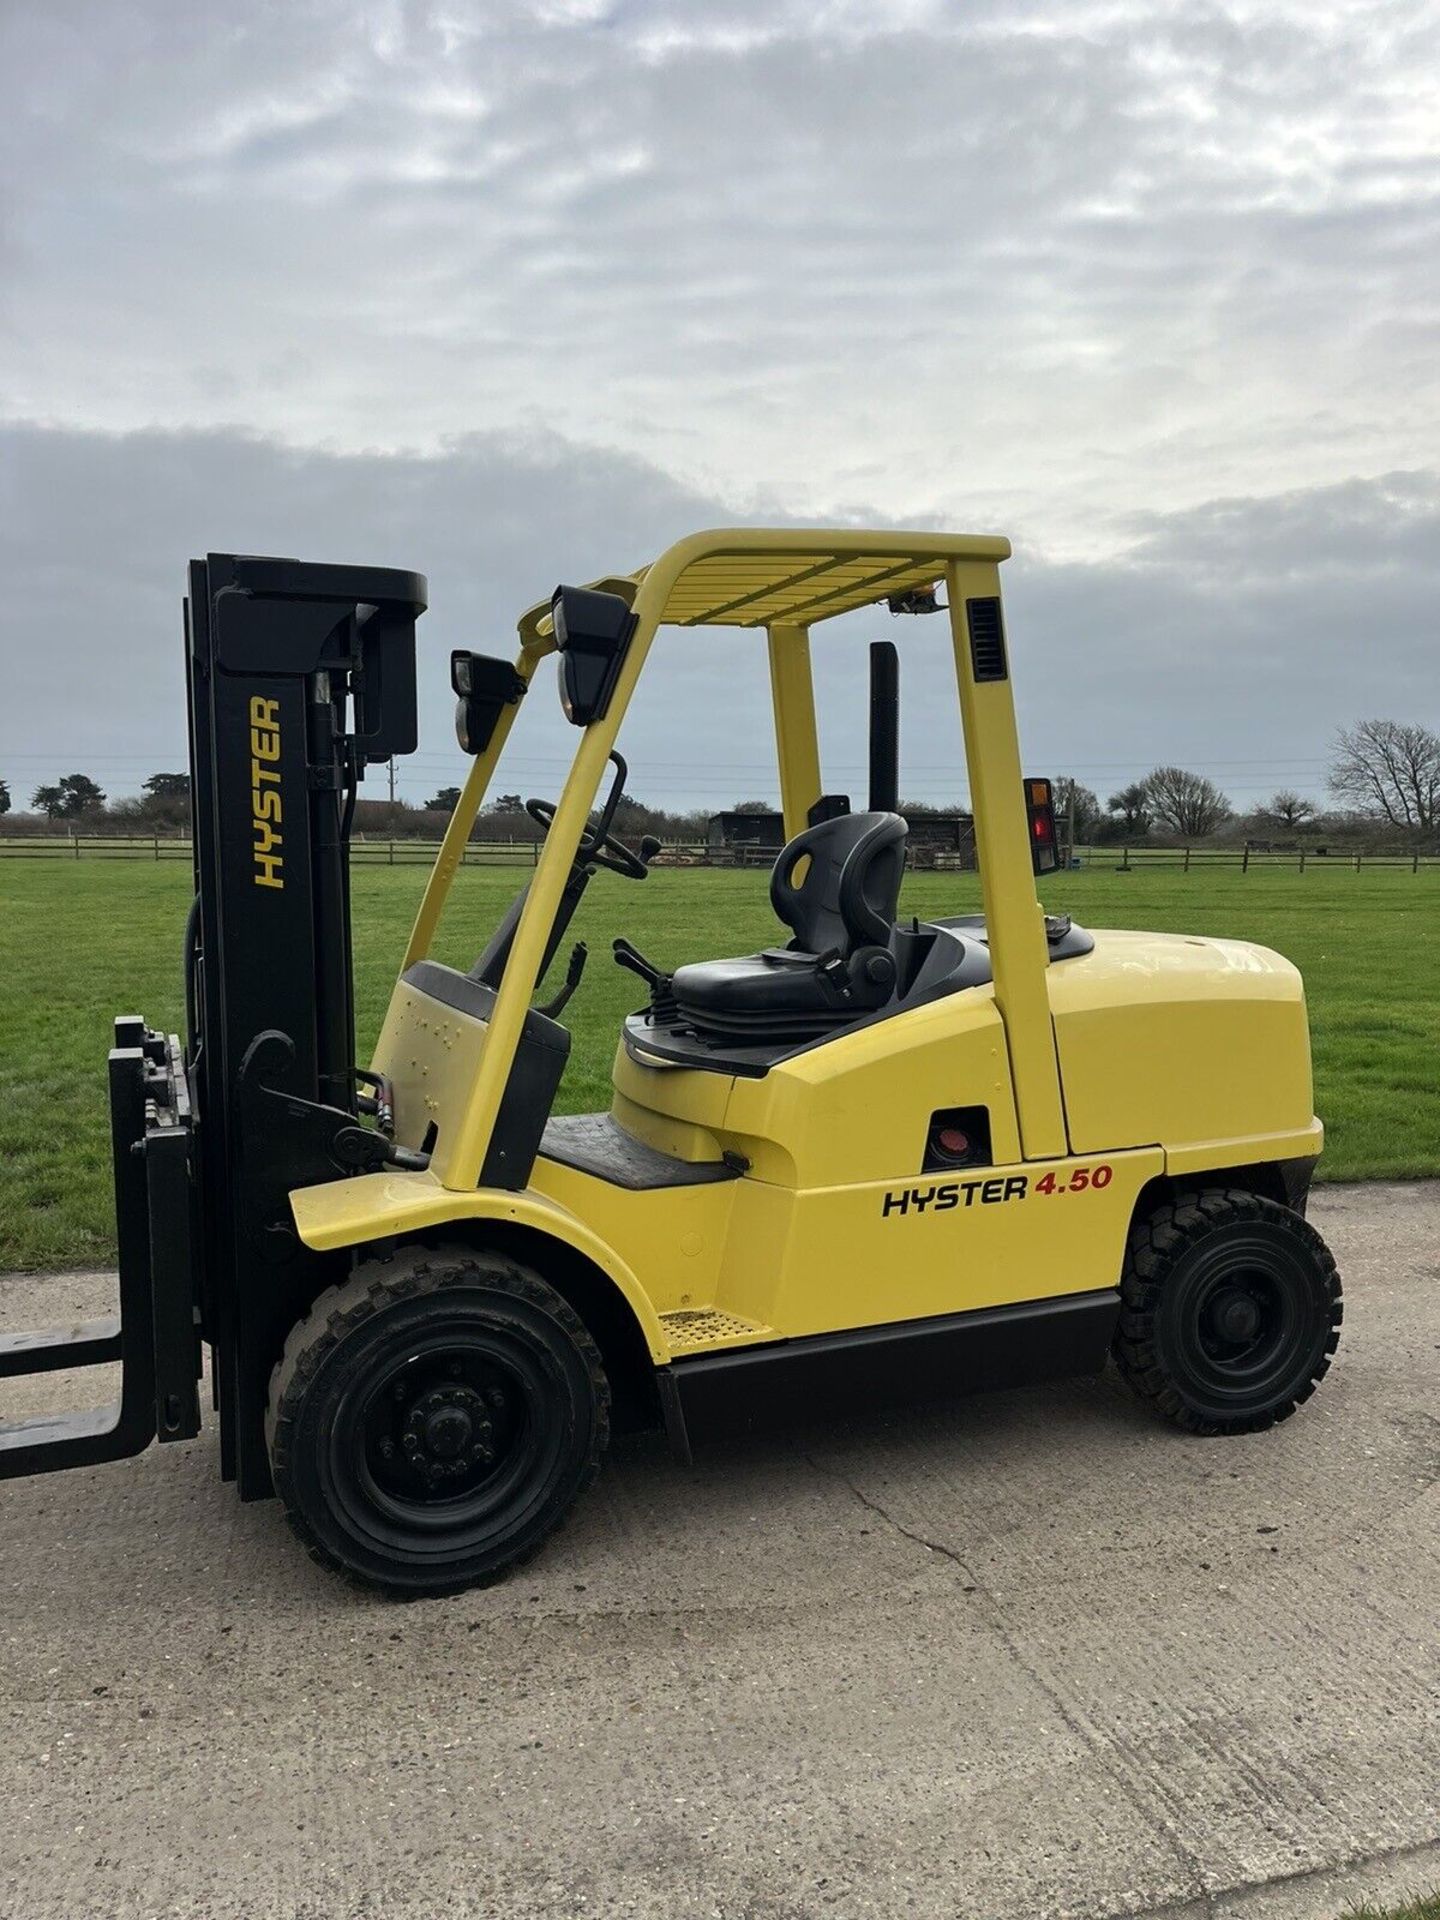 HYSTER 4.5 Tonne Diesel Forklift (container spec) - Image 6 of 6